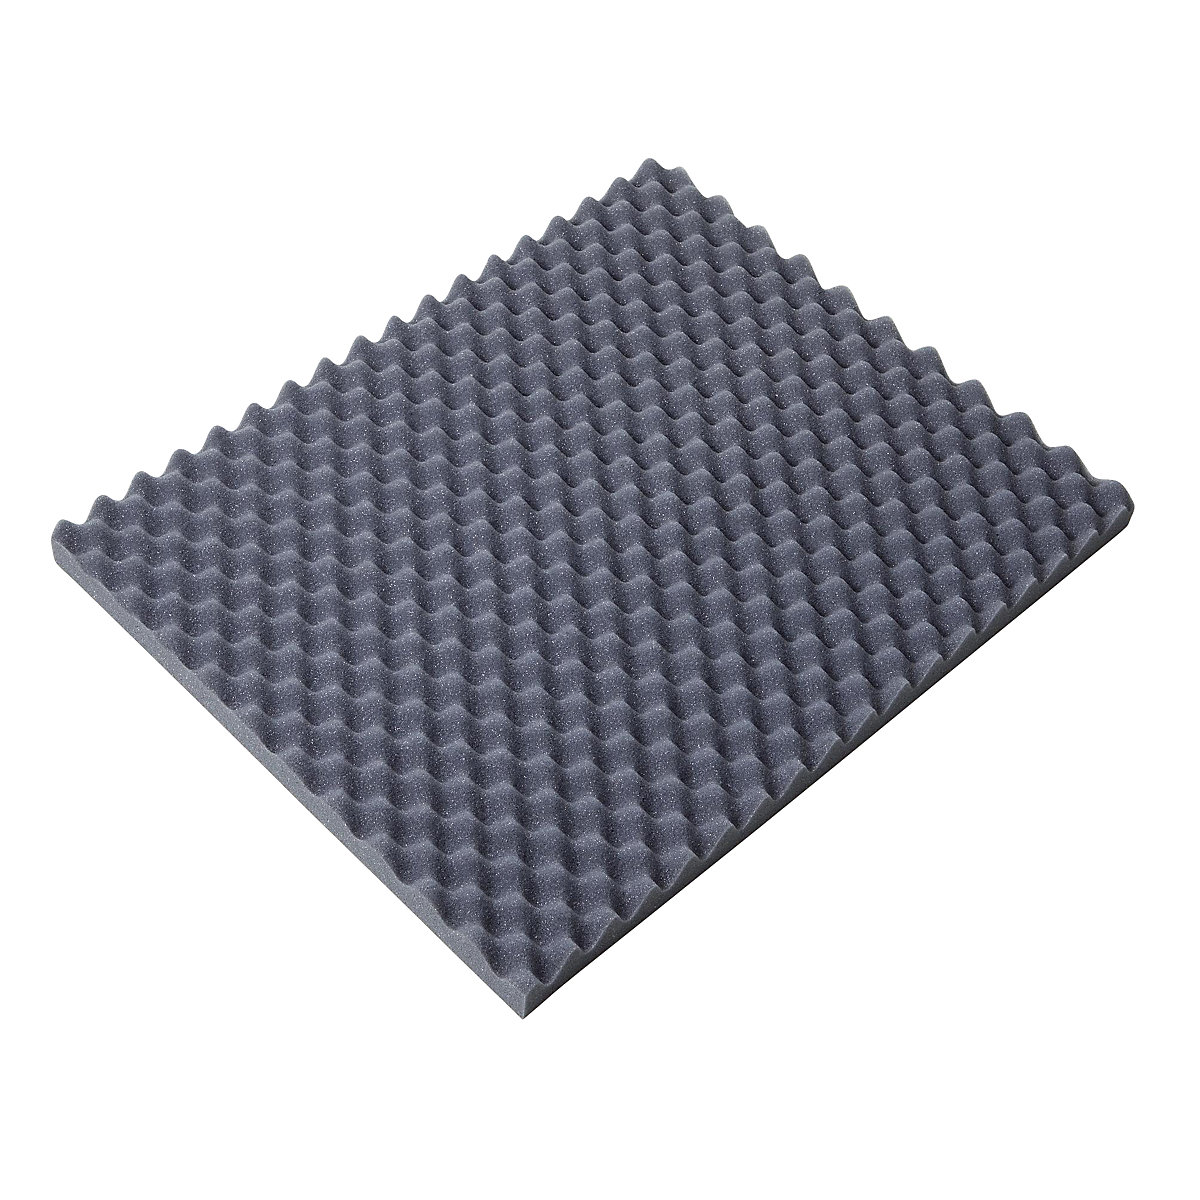 Egg crate foam sheet, 40 mm thick, LxW 500 x 300 mm, pack of 26-6